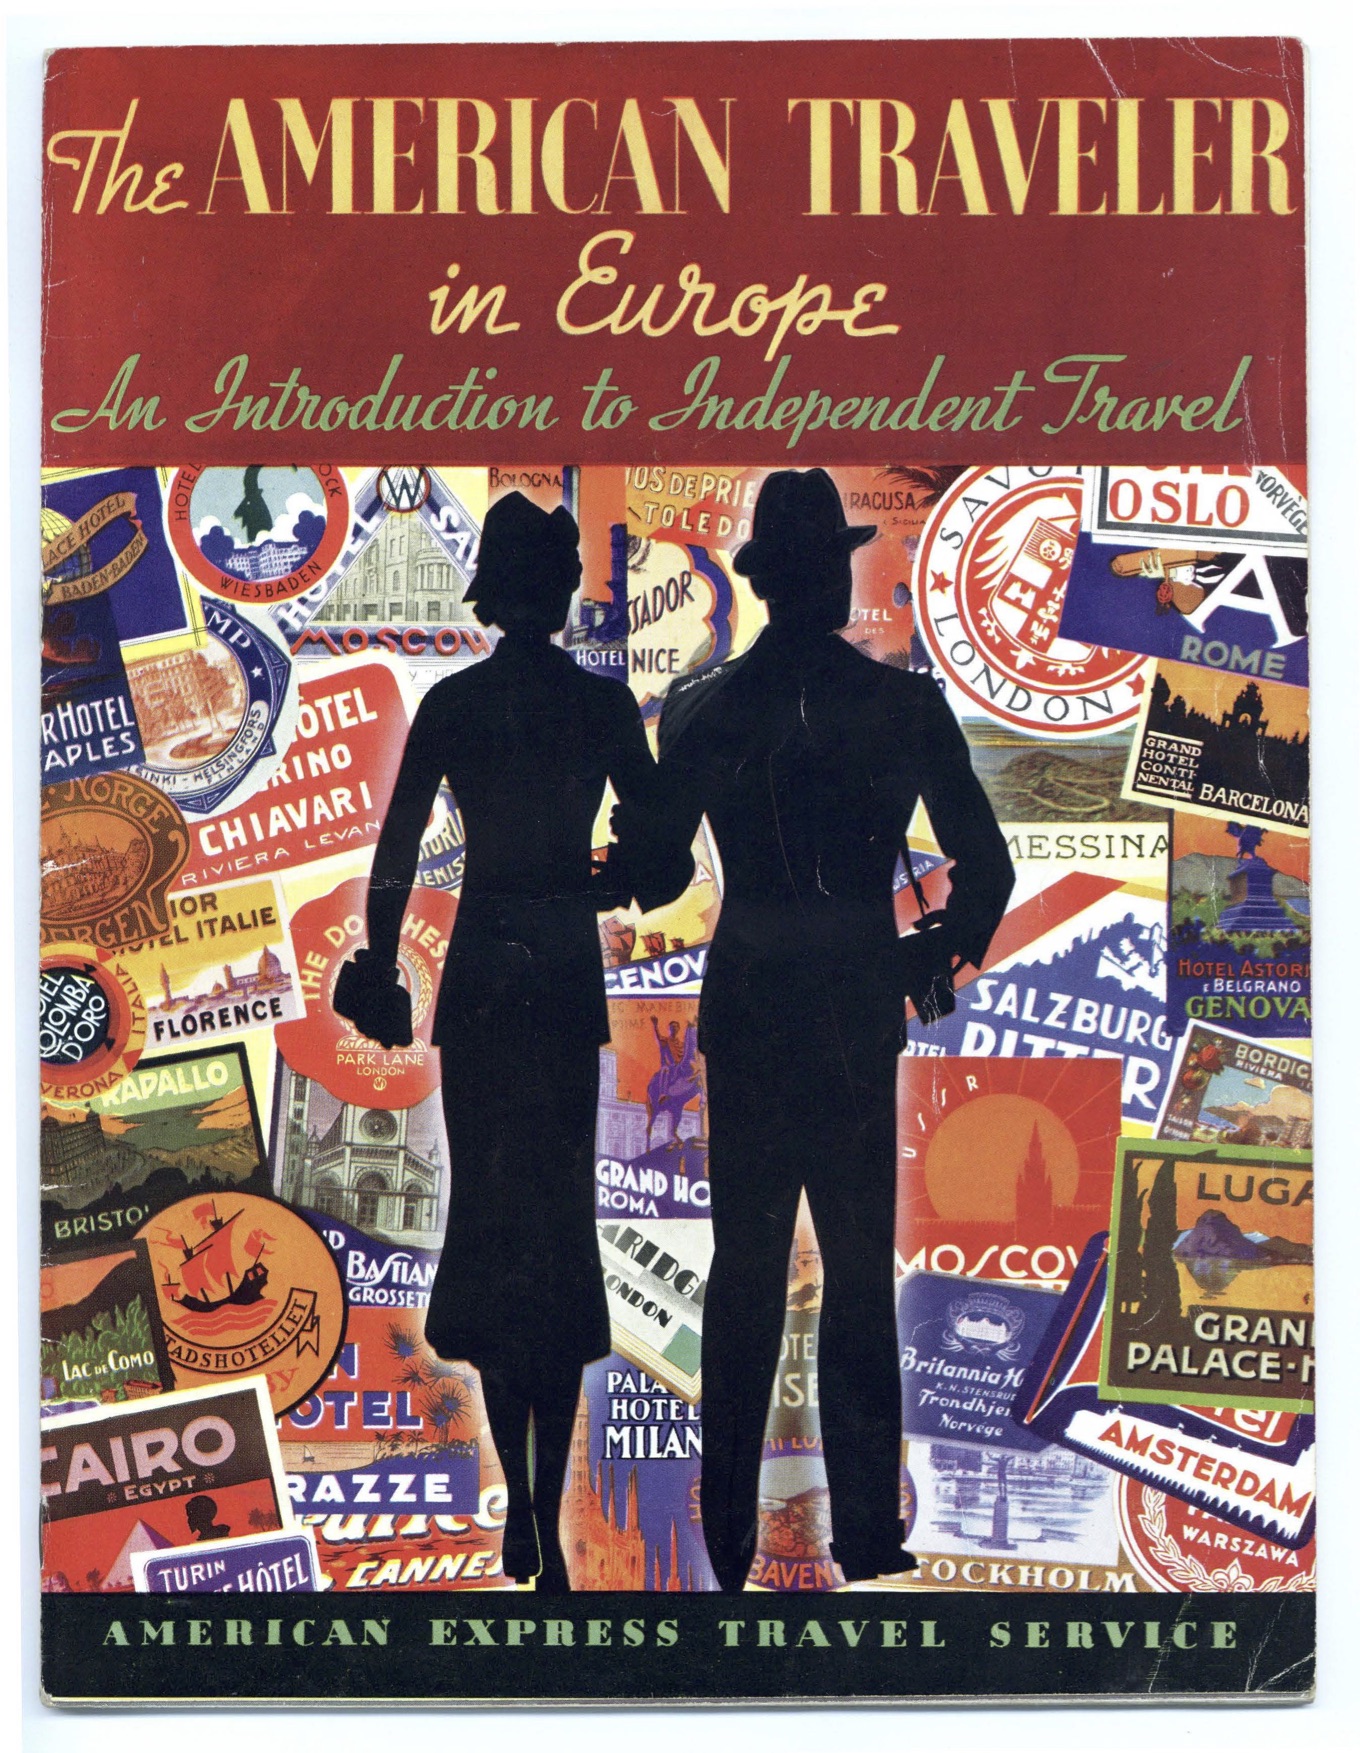 The American Traveler in Europe Booklet